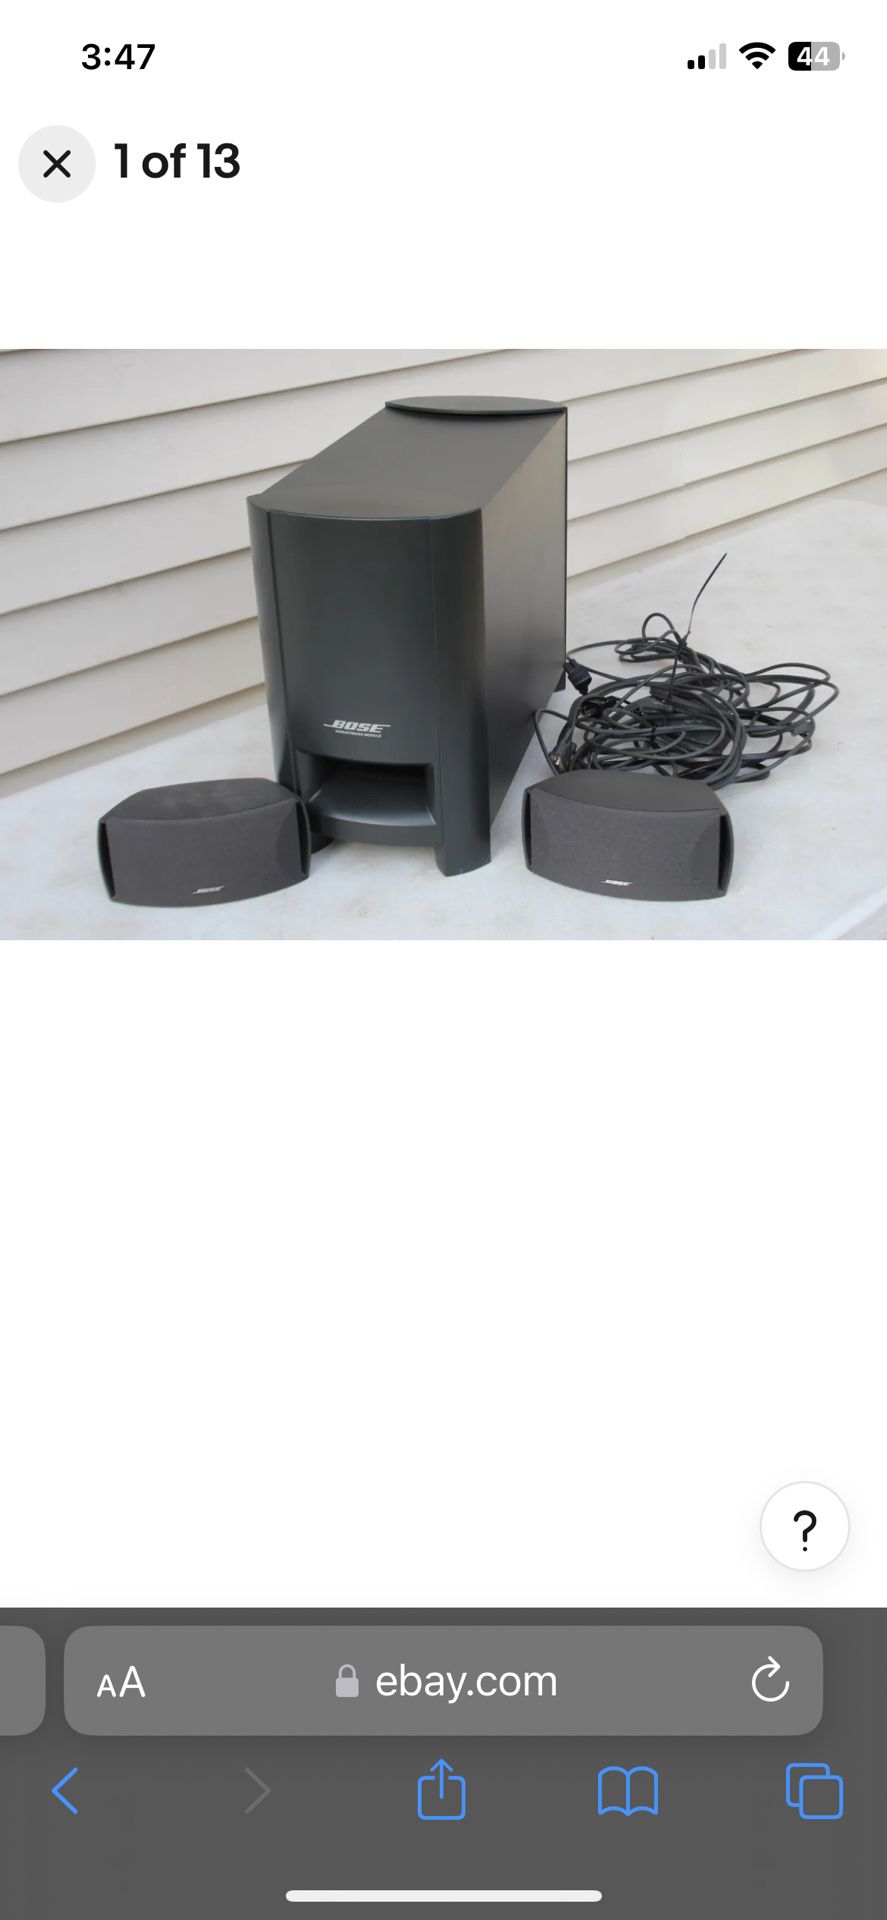 Bose CineMate Digital Home Theater System Subwoofer Sub w/ 2 Speakers + Cords